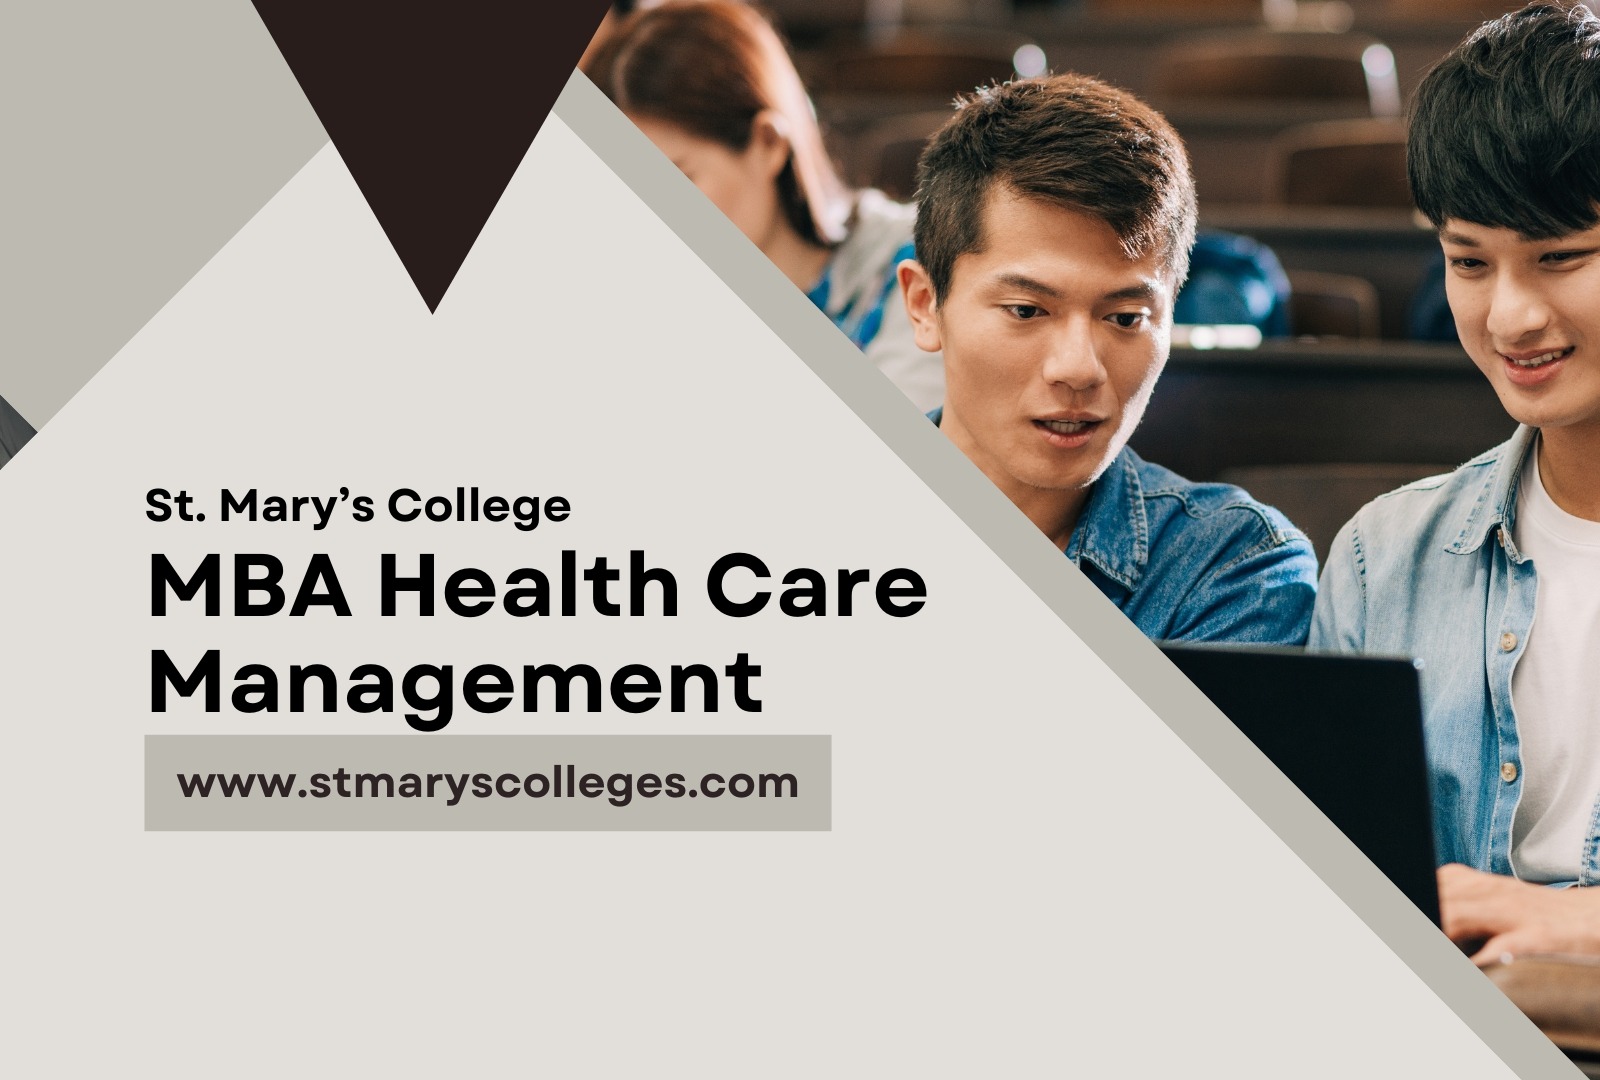 MBA HEALTH CARE MANAGEMENT